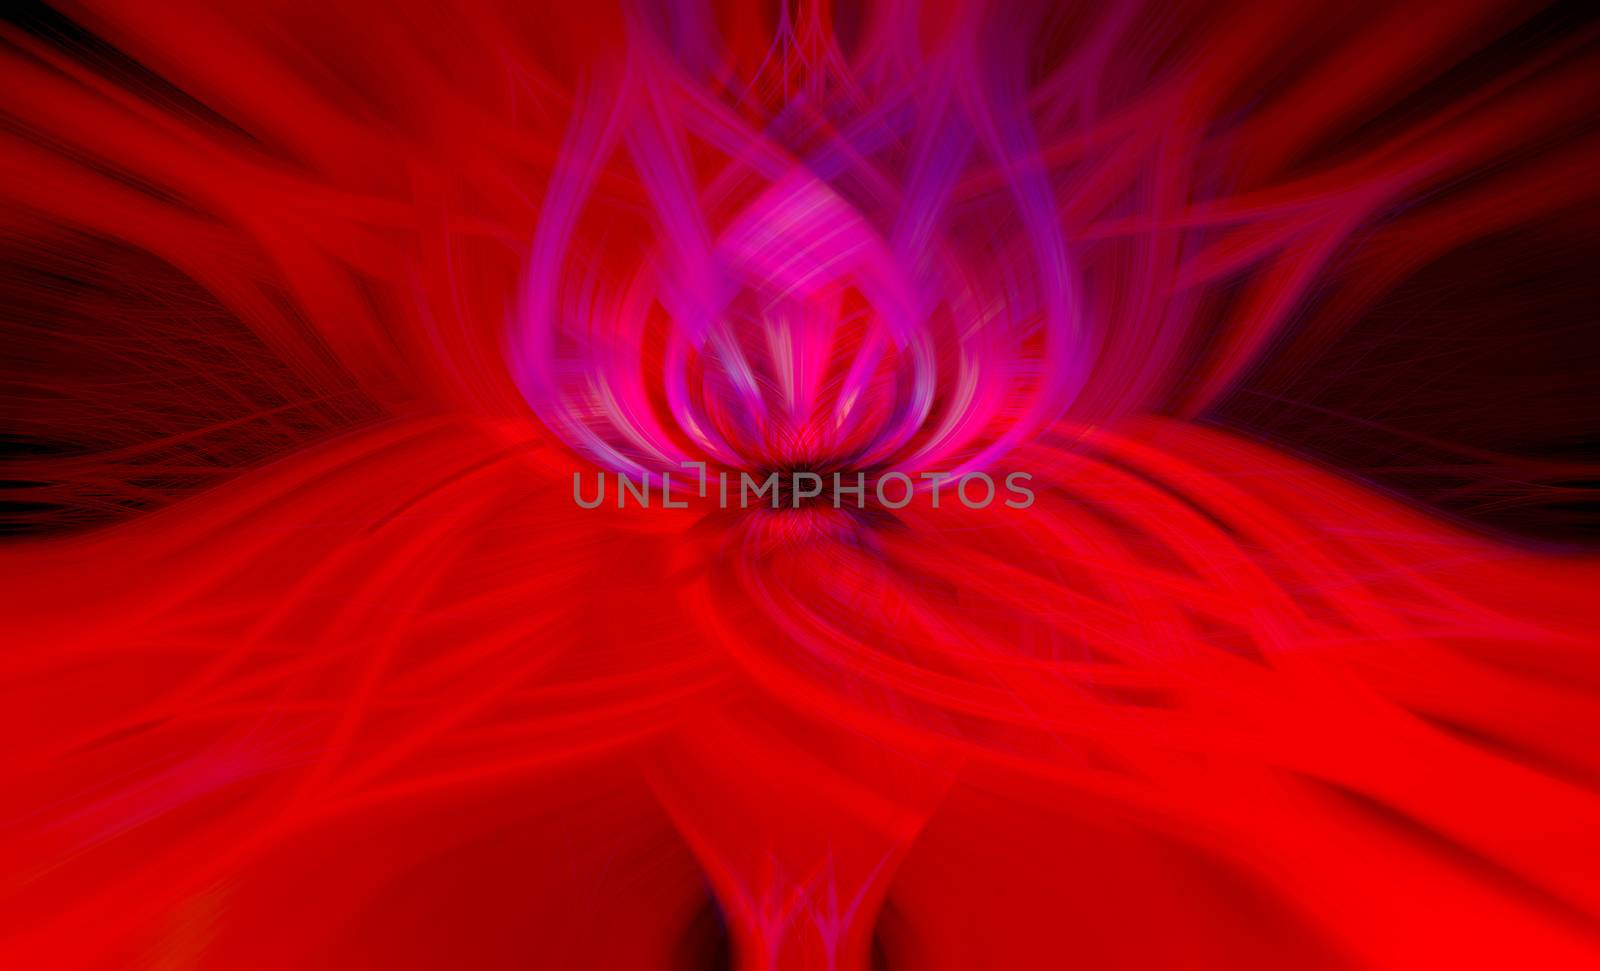 Beautiful abstract intertwined symmetrical 3d fibers forming a shape of sparkle, flame, flower, interlinked hearts. Blue, maroon, red, and purple colors. Illustration.